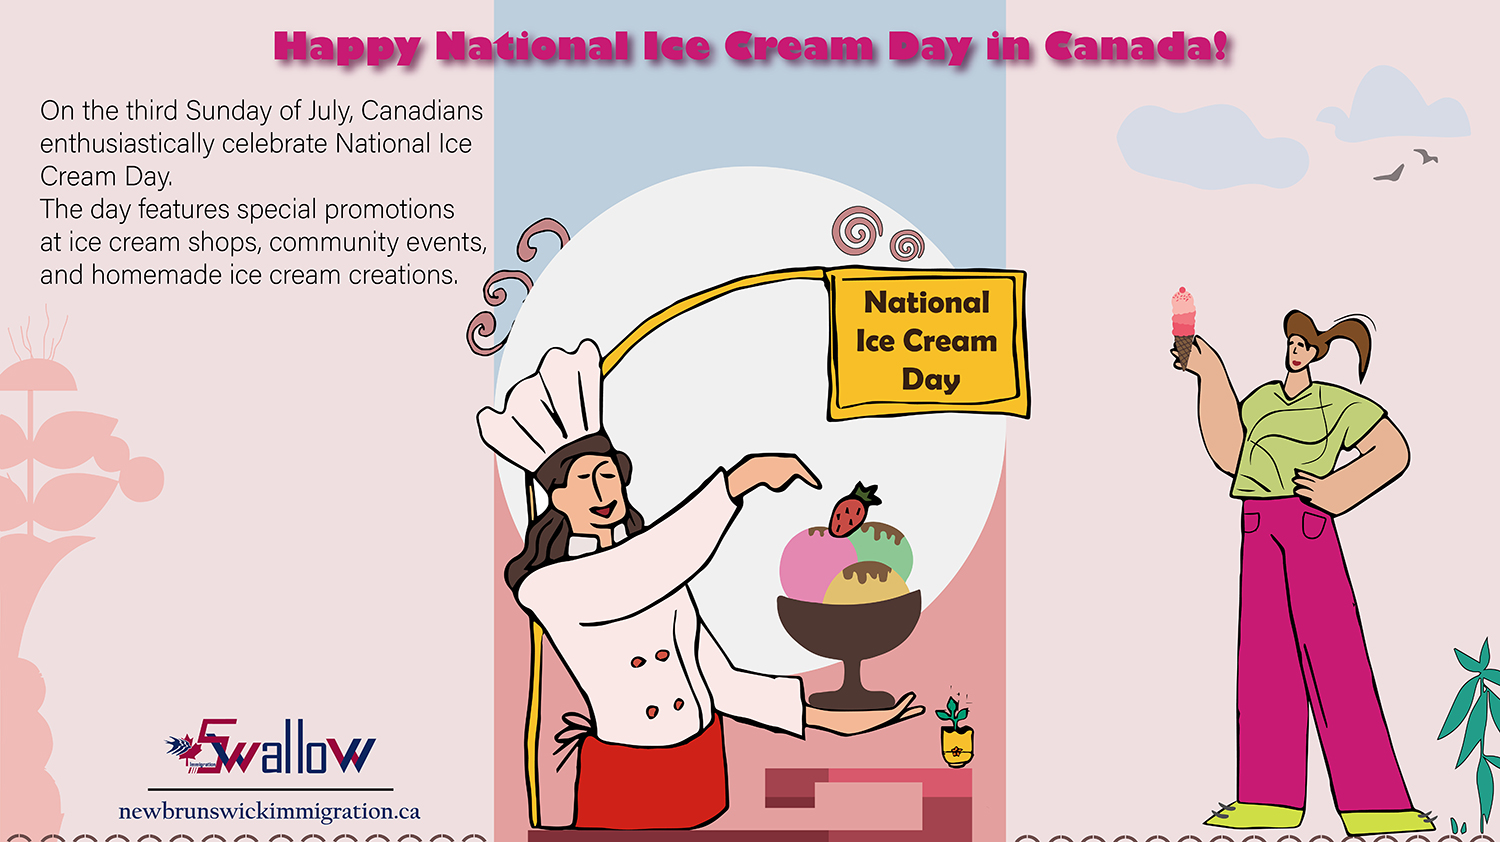 Happy National Ice Cream Day in Canada!